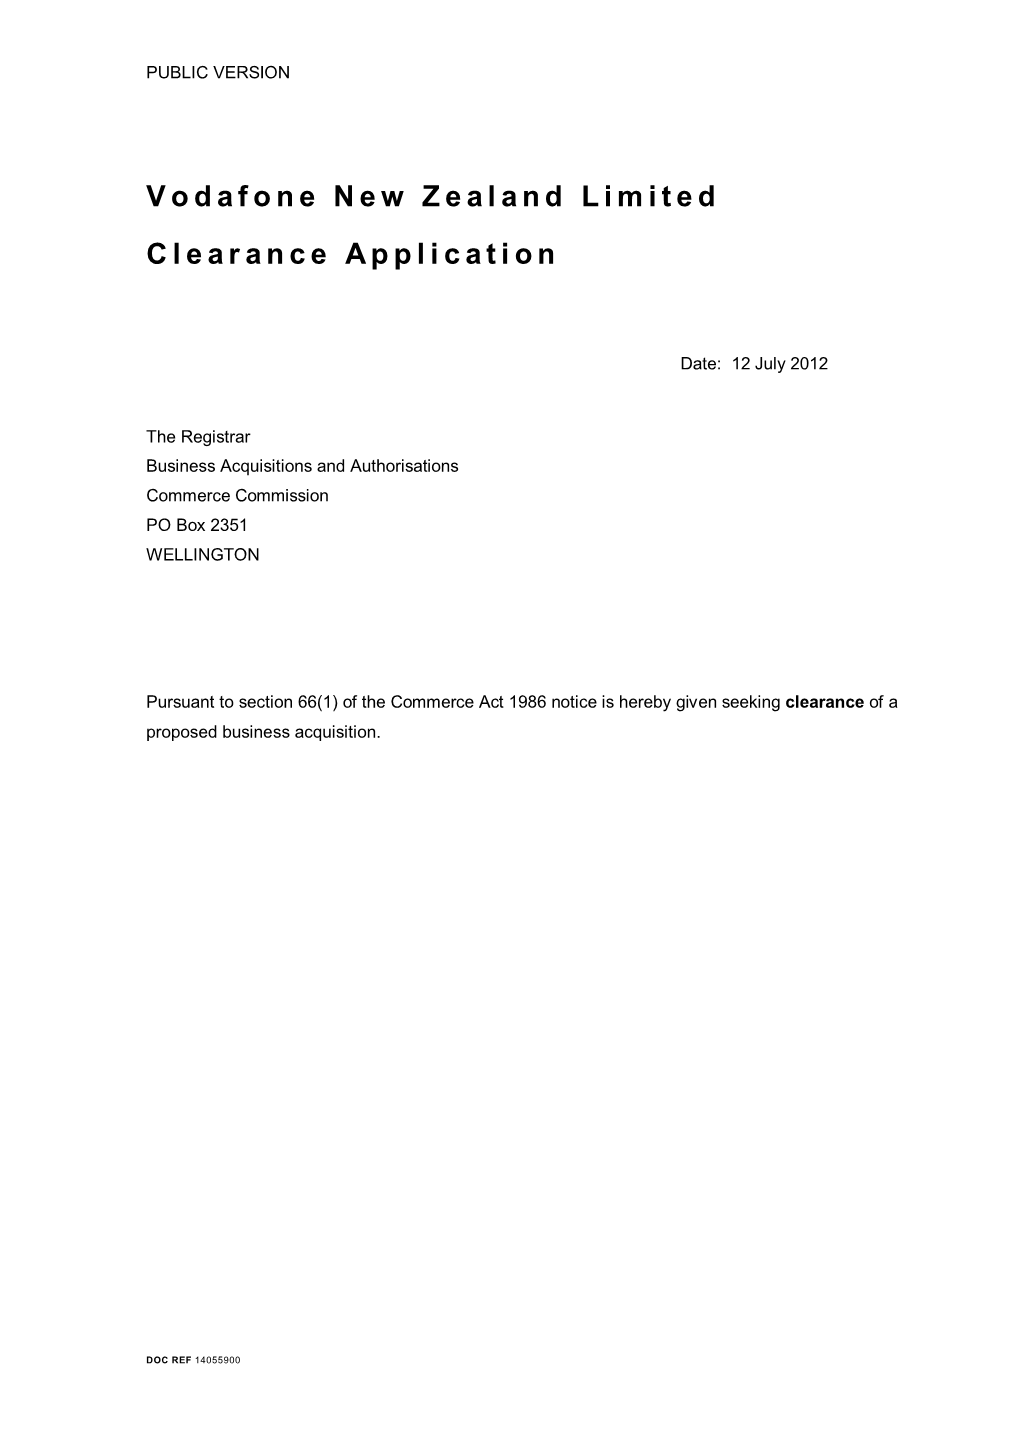 Vodafone New Zealand Limited Clearance Application